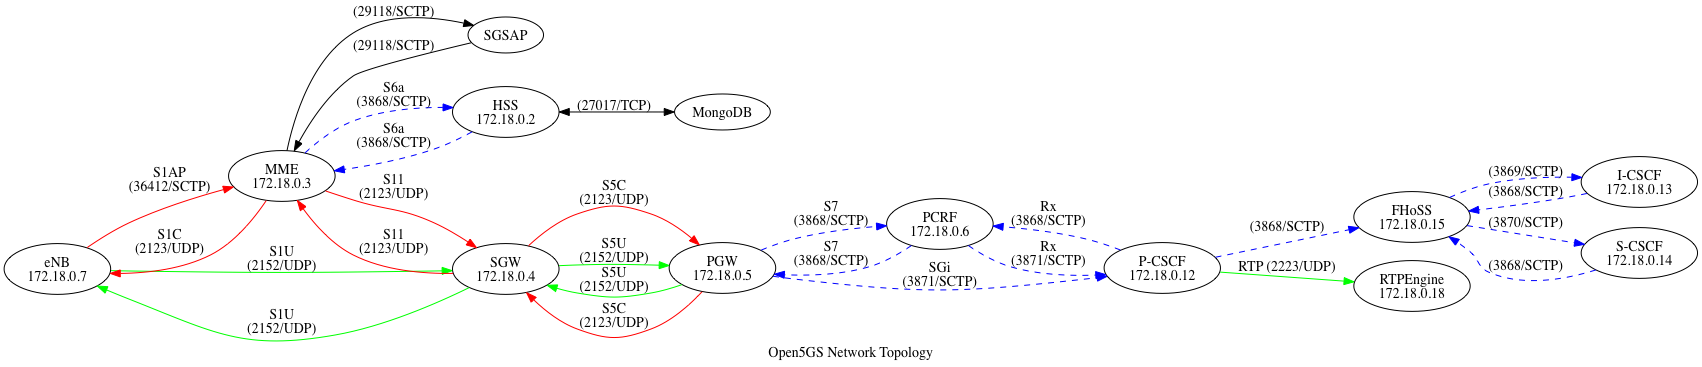 Network topology of Open5GS and IMS, (https://raw.githubusercontent.com/miaoski/ docker_open5gs/master/network-topology.png)